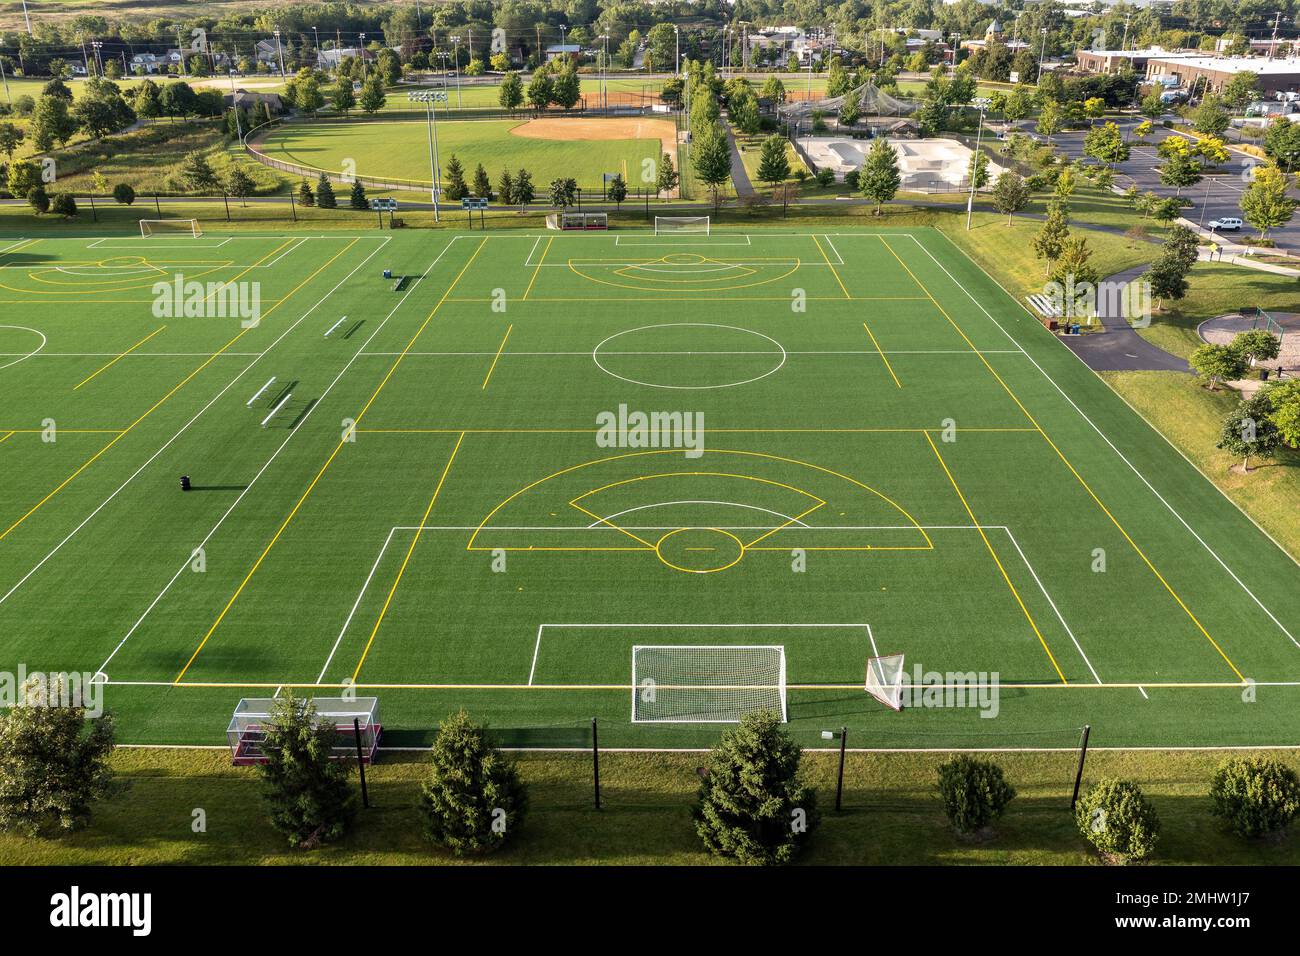 Aerial view of a sports complex with baseball/softball diamonds, artificial turf soccer and lacrosse field, a skate park and batting cages. Stock Photo